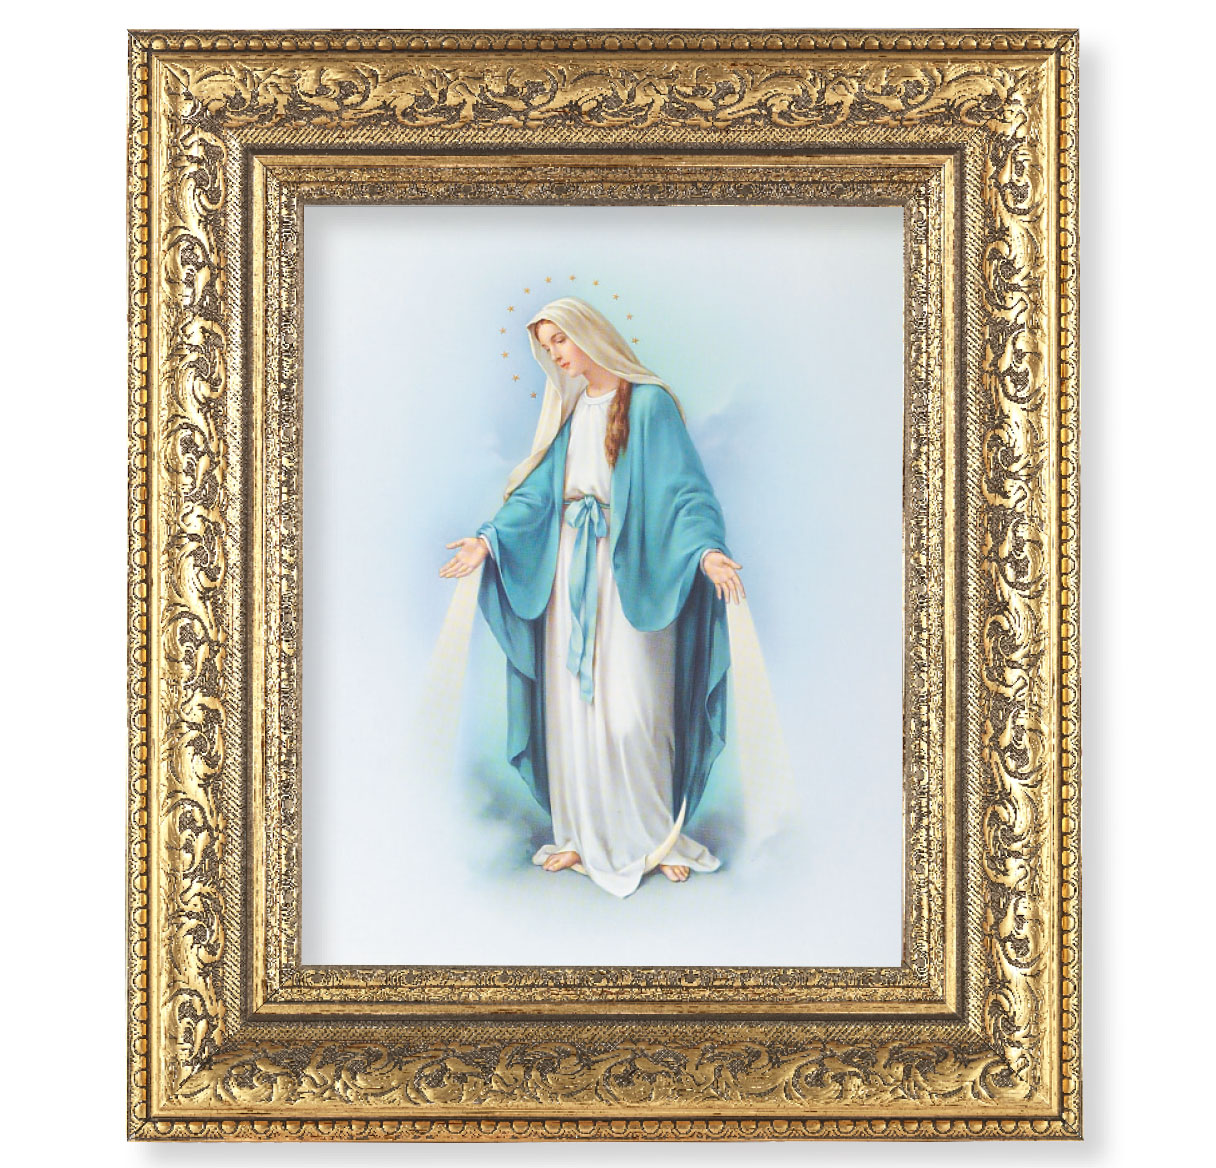 Print Our Lady of Grace 8 x 10 inch Gold Framed